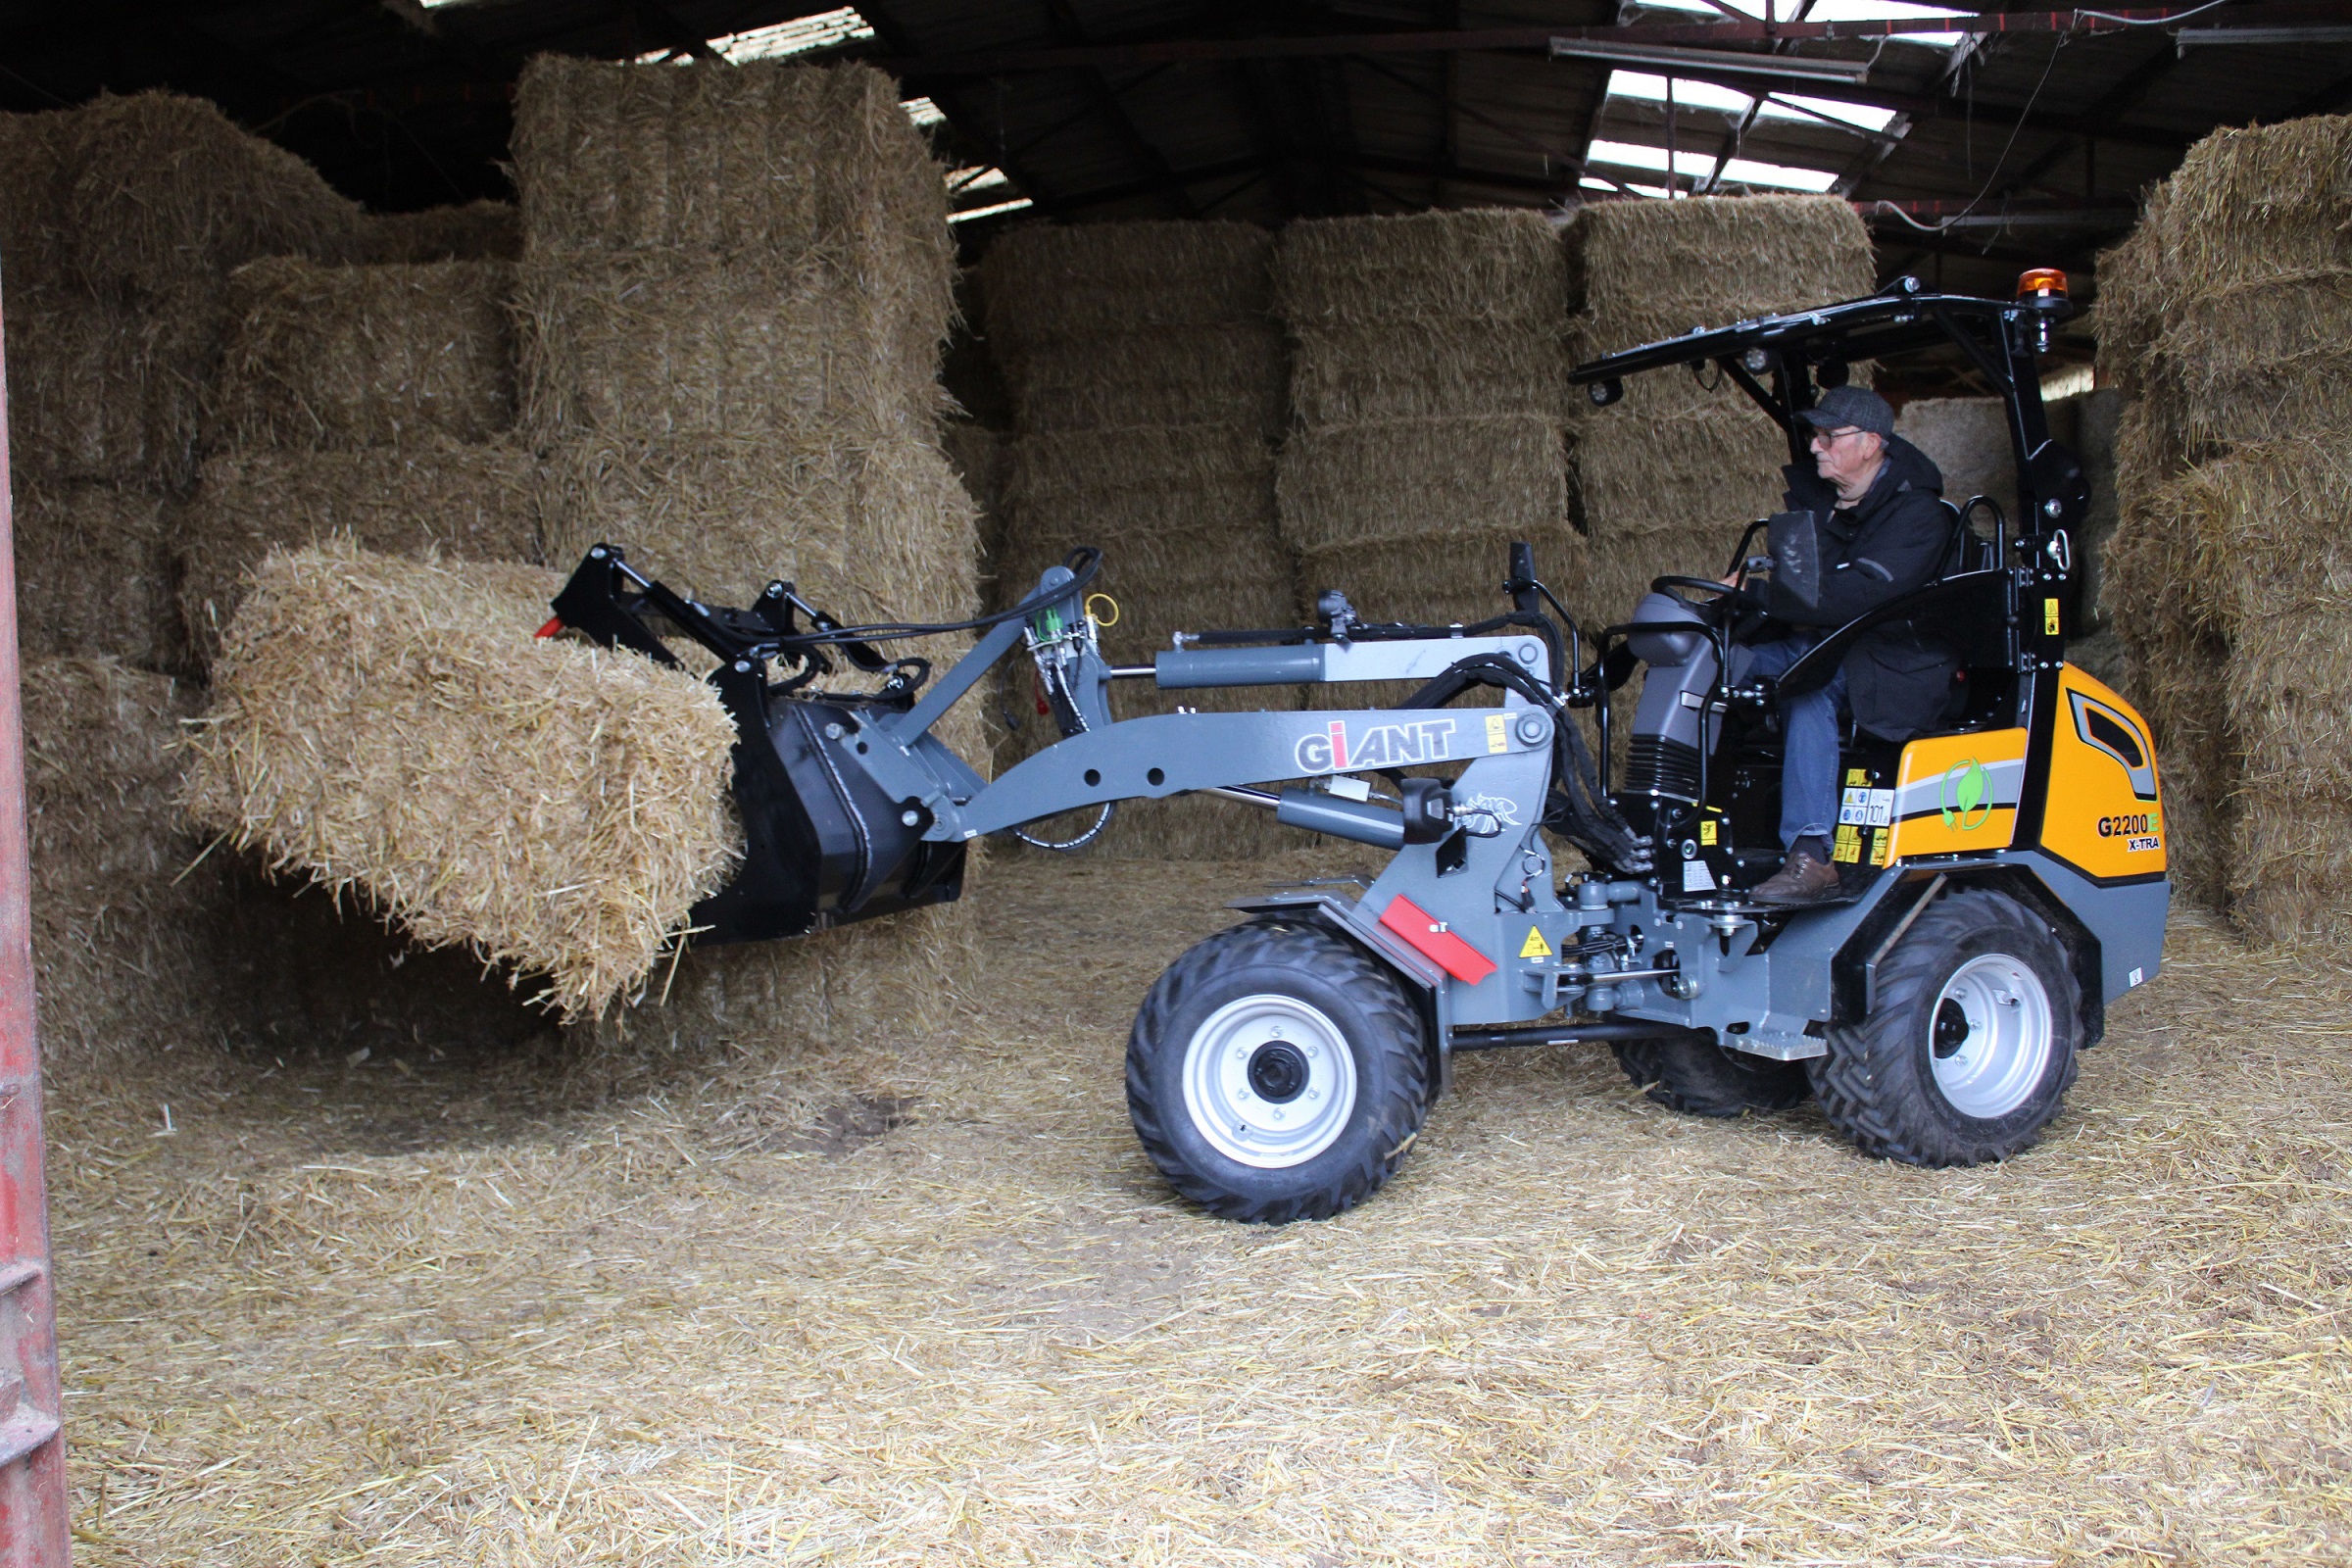 Powerful and versatile: The GIANT G2200 E X-TRA is getting fresh straw for the horse stables.